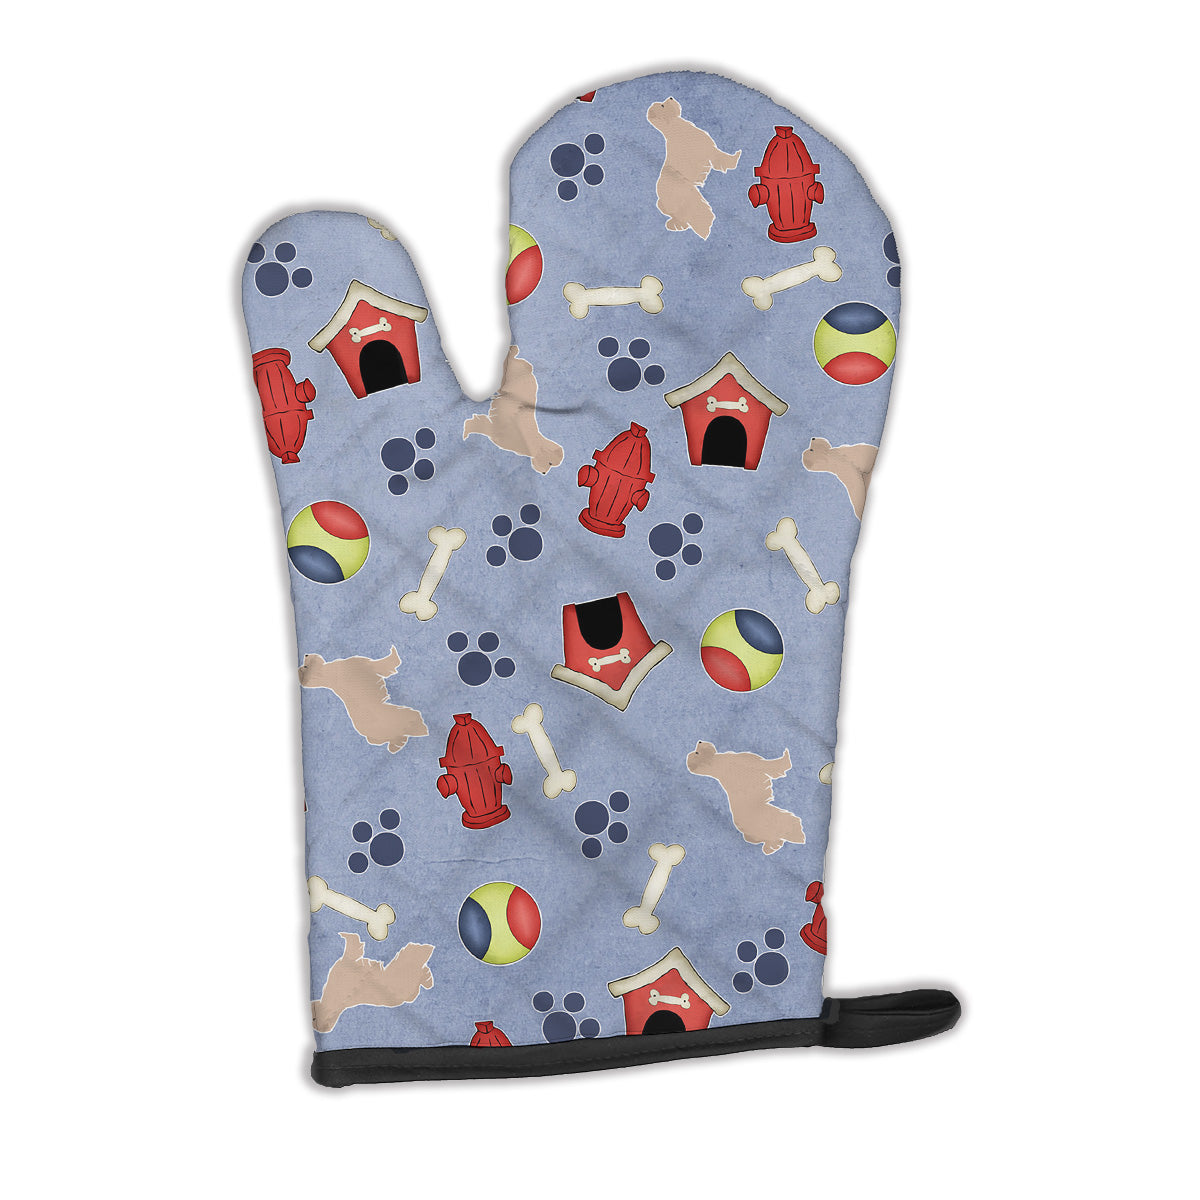 Pyrenean Shepherd Dog House Collection Oven Mitt BB3918OVMT